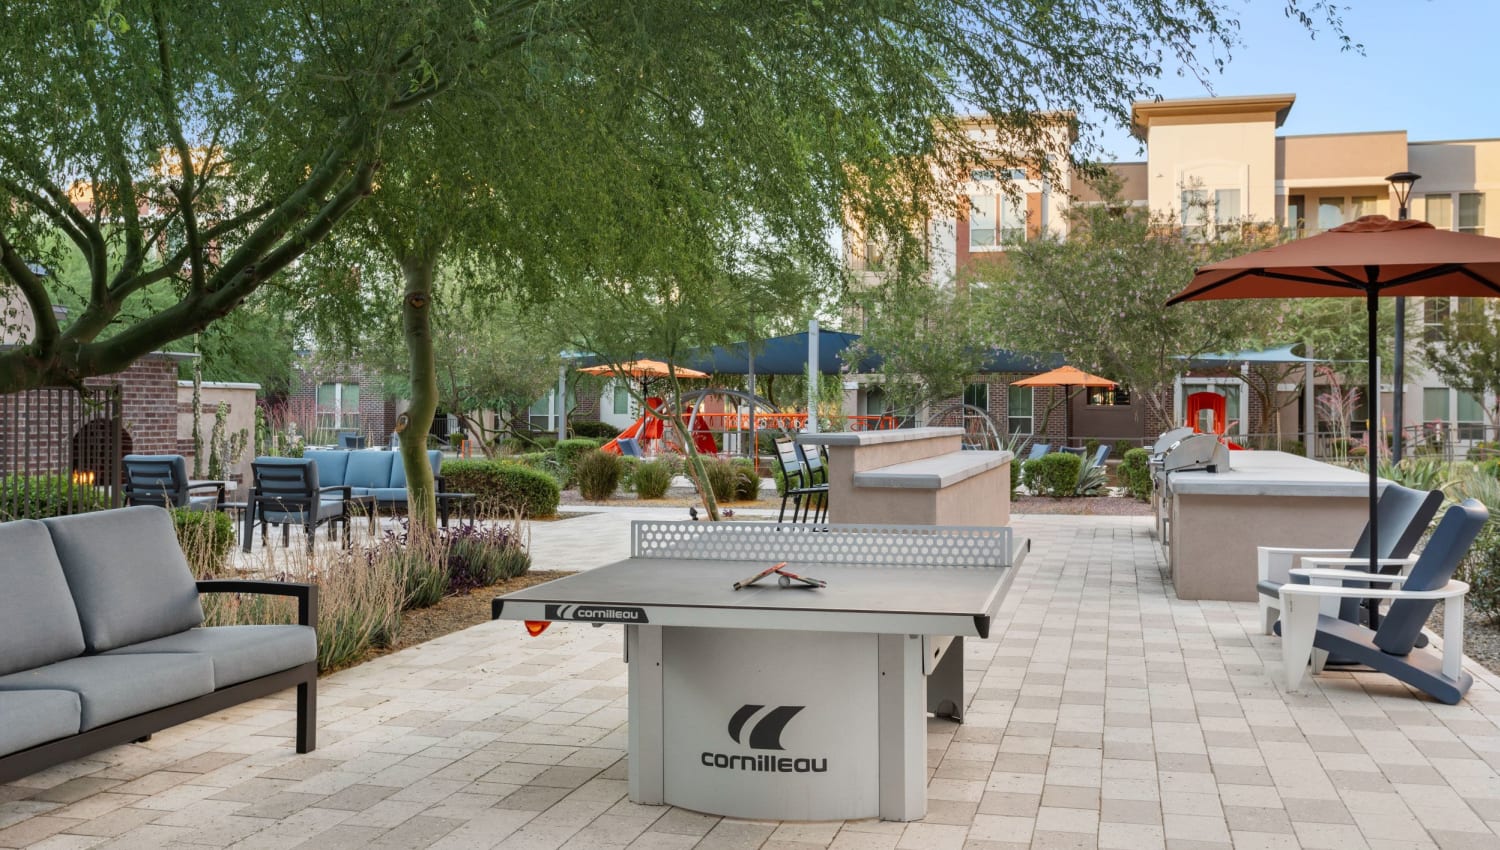 Outdoor Games area at Town Commons in Gilbert, Arizona